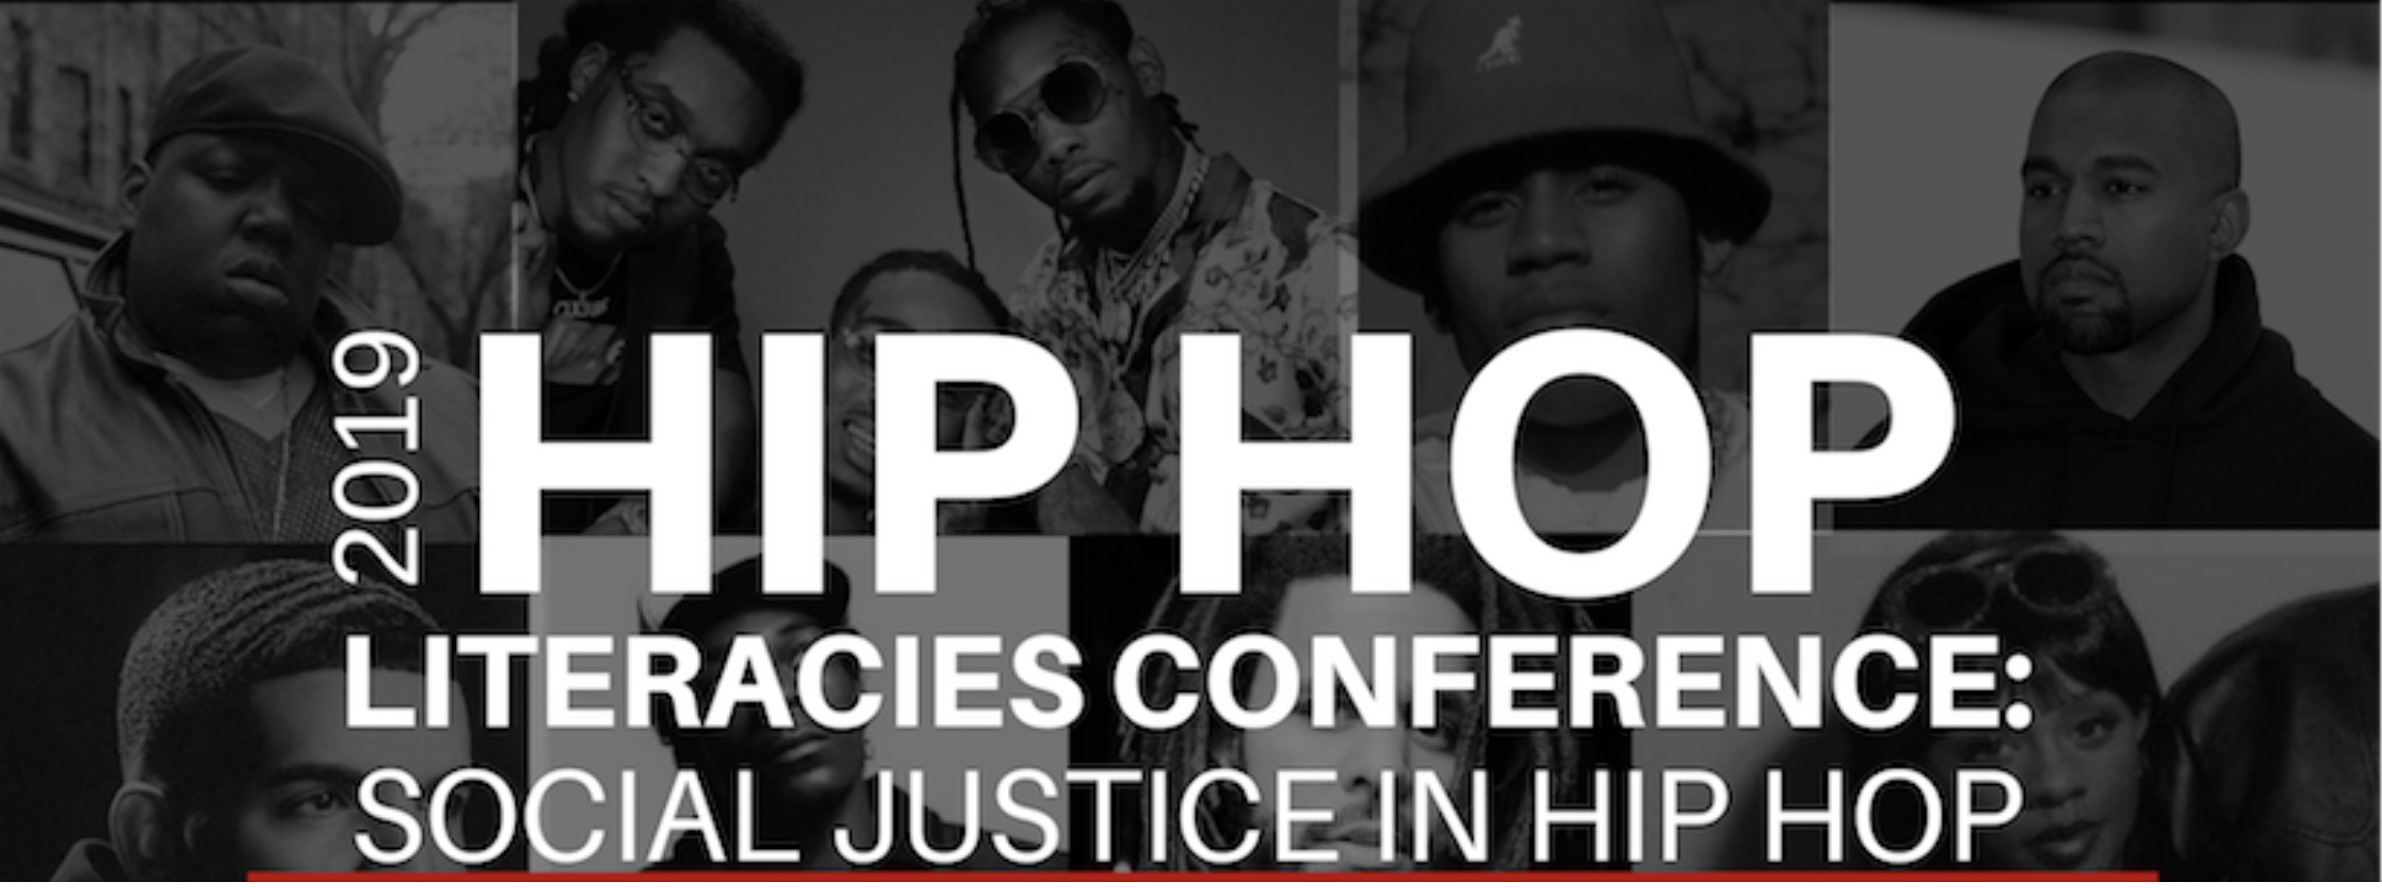 2019 Hiphop Literacies Conference Call For Proposals And Performers St John S English